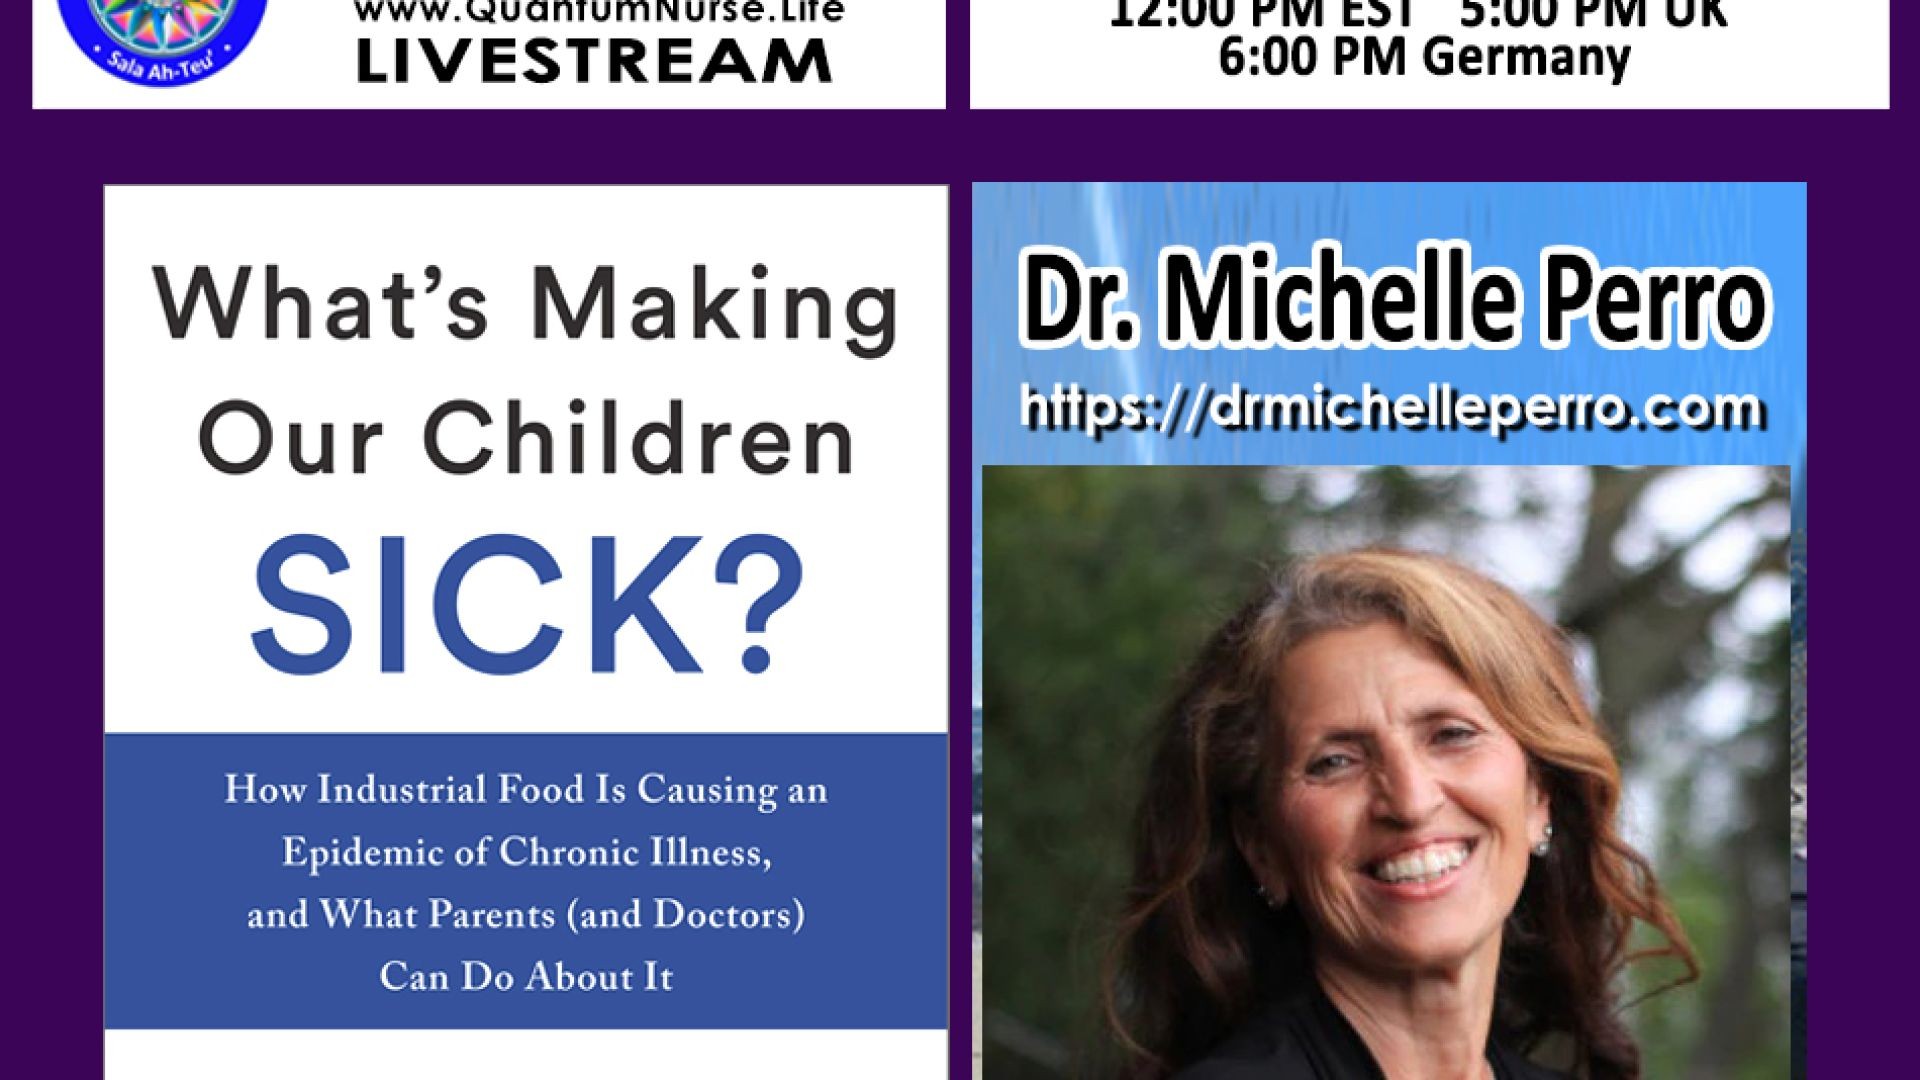 Dr. Michelle Perro - "What's Making Our Children Sick"